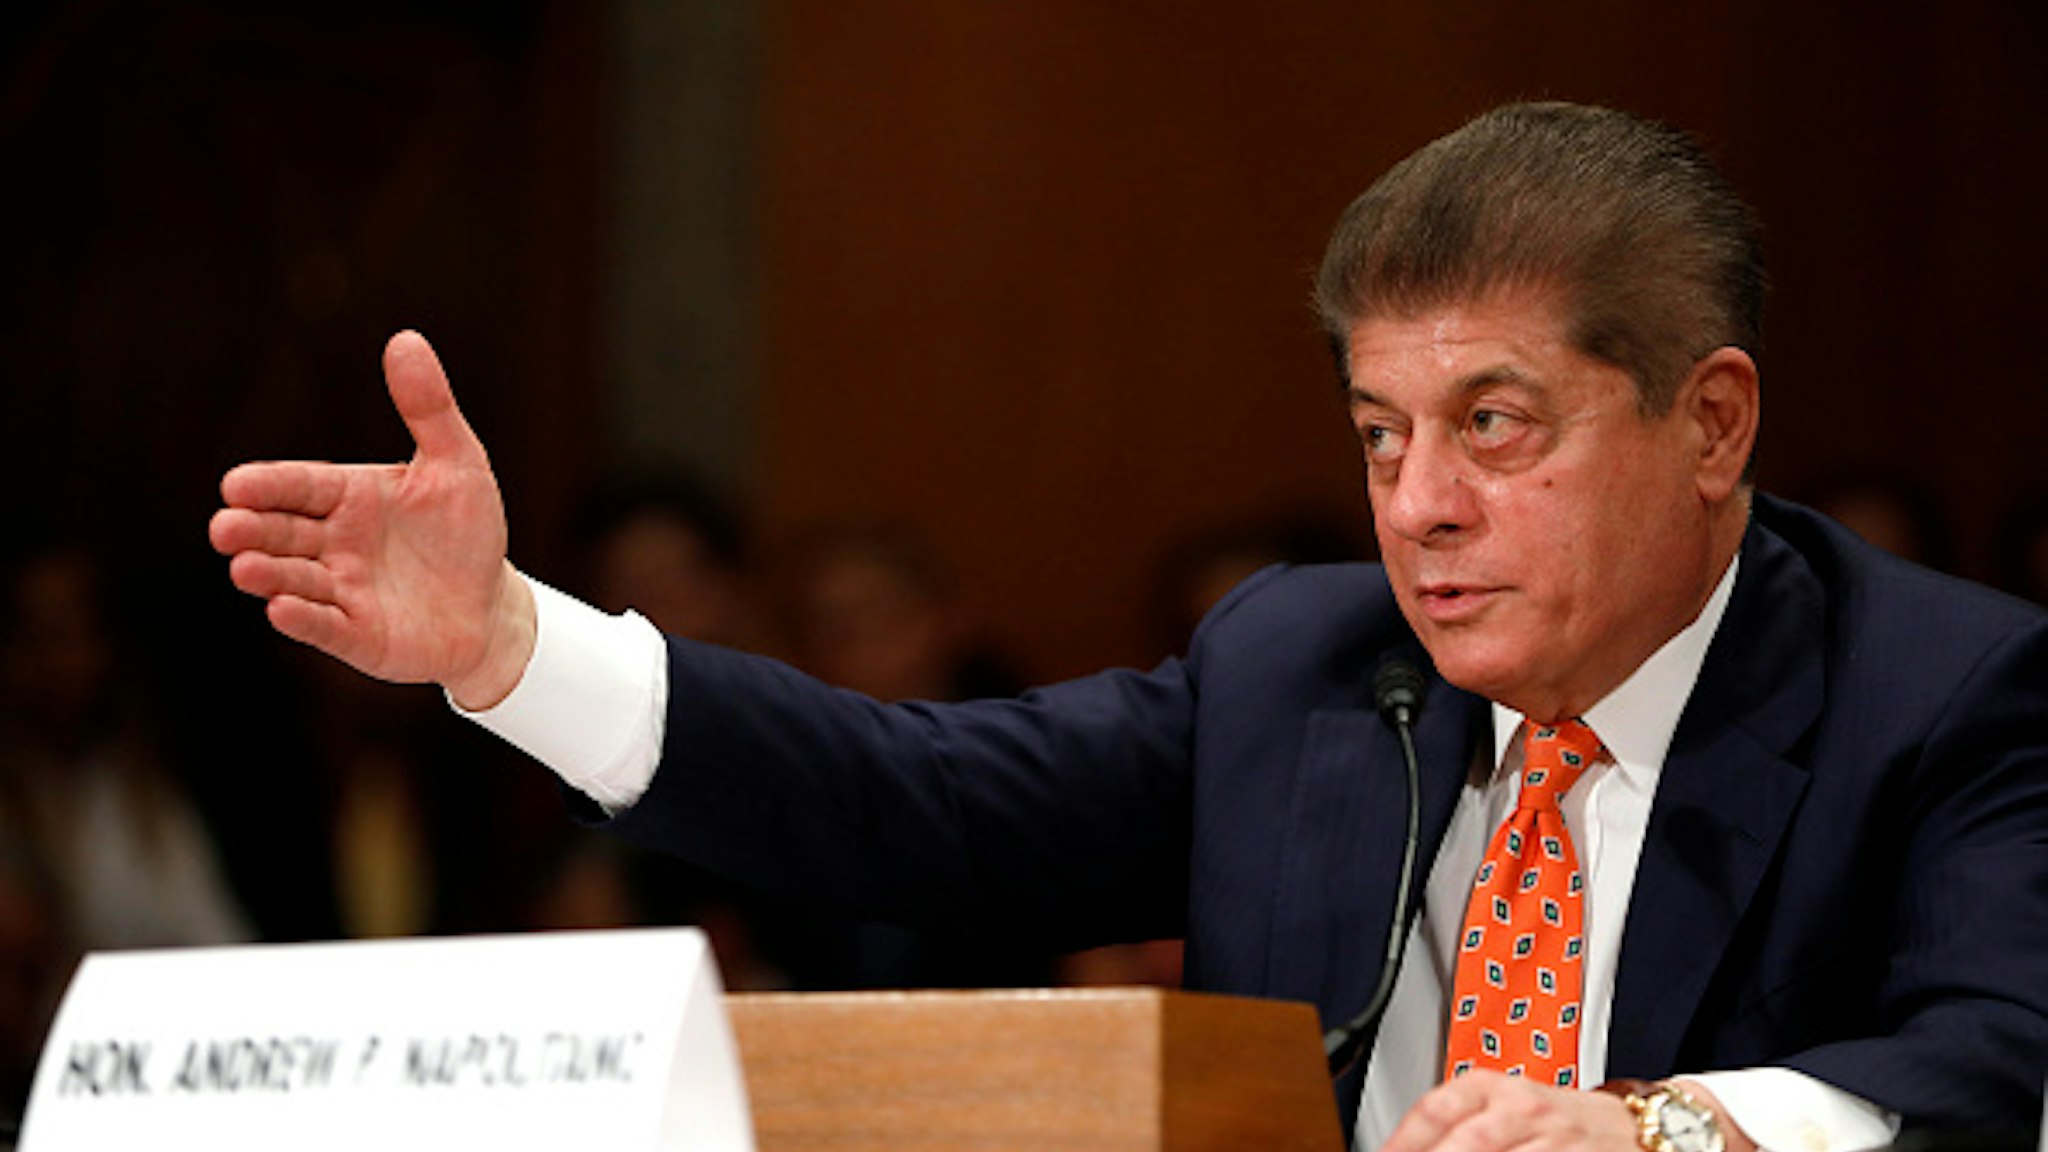 WASHINGTON, DC - JUNE 6: Andrew Napolitano, senior judicial analyst for the Fox News Channel, testifies during a Federal Spending Oversight And Emergency Management Subcommittee hearing June 6, 2018 on Capitol Hill in Washington, DC. Members of both parties raised questions about a lack of Congressional oversight of military deployments overseas.